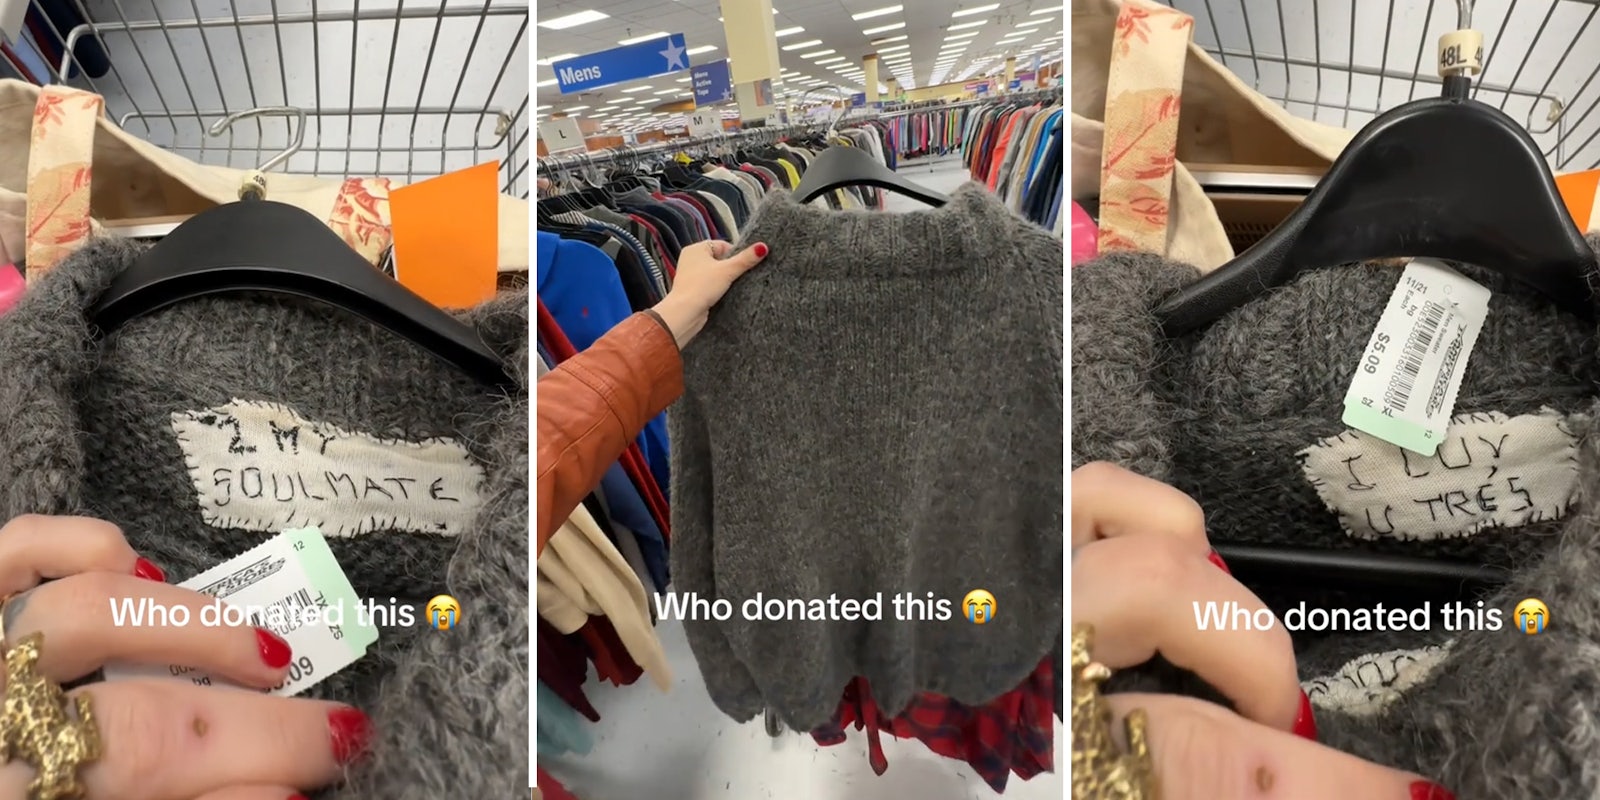 Woman finds sweater labeled '2 my soulmate' at thrift store